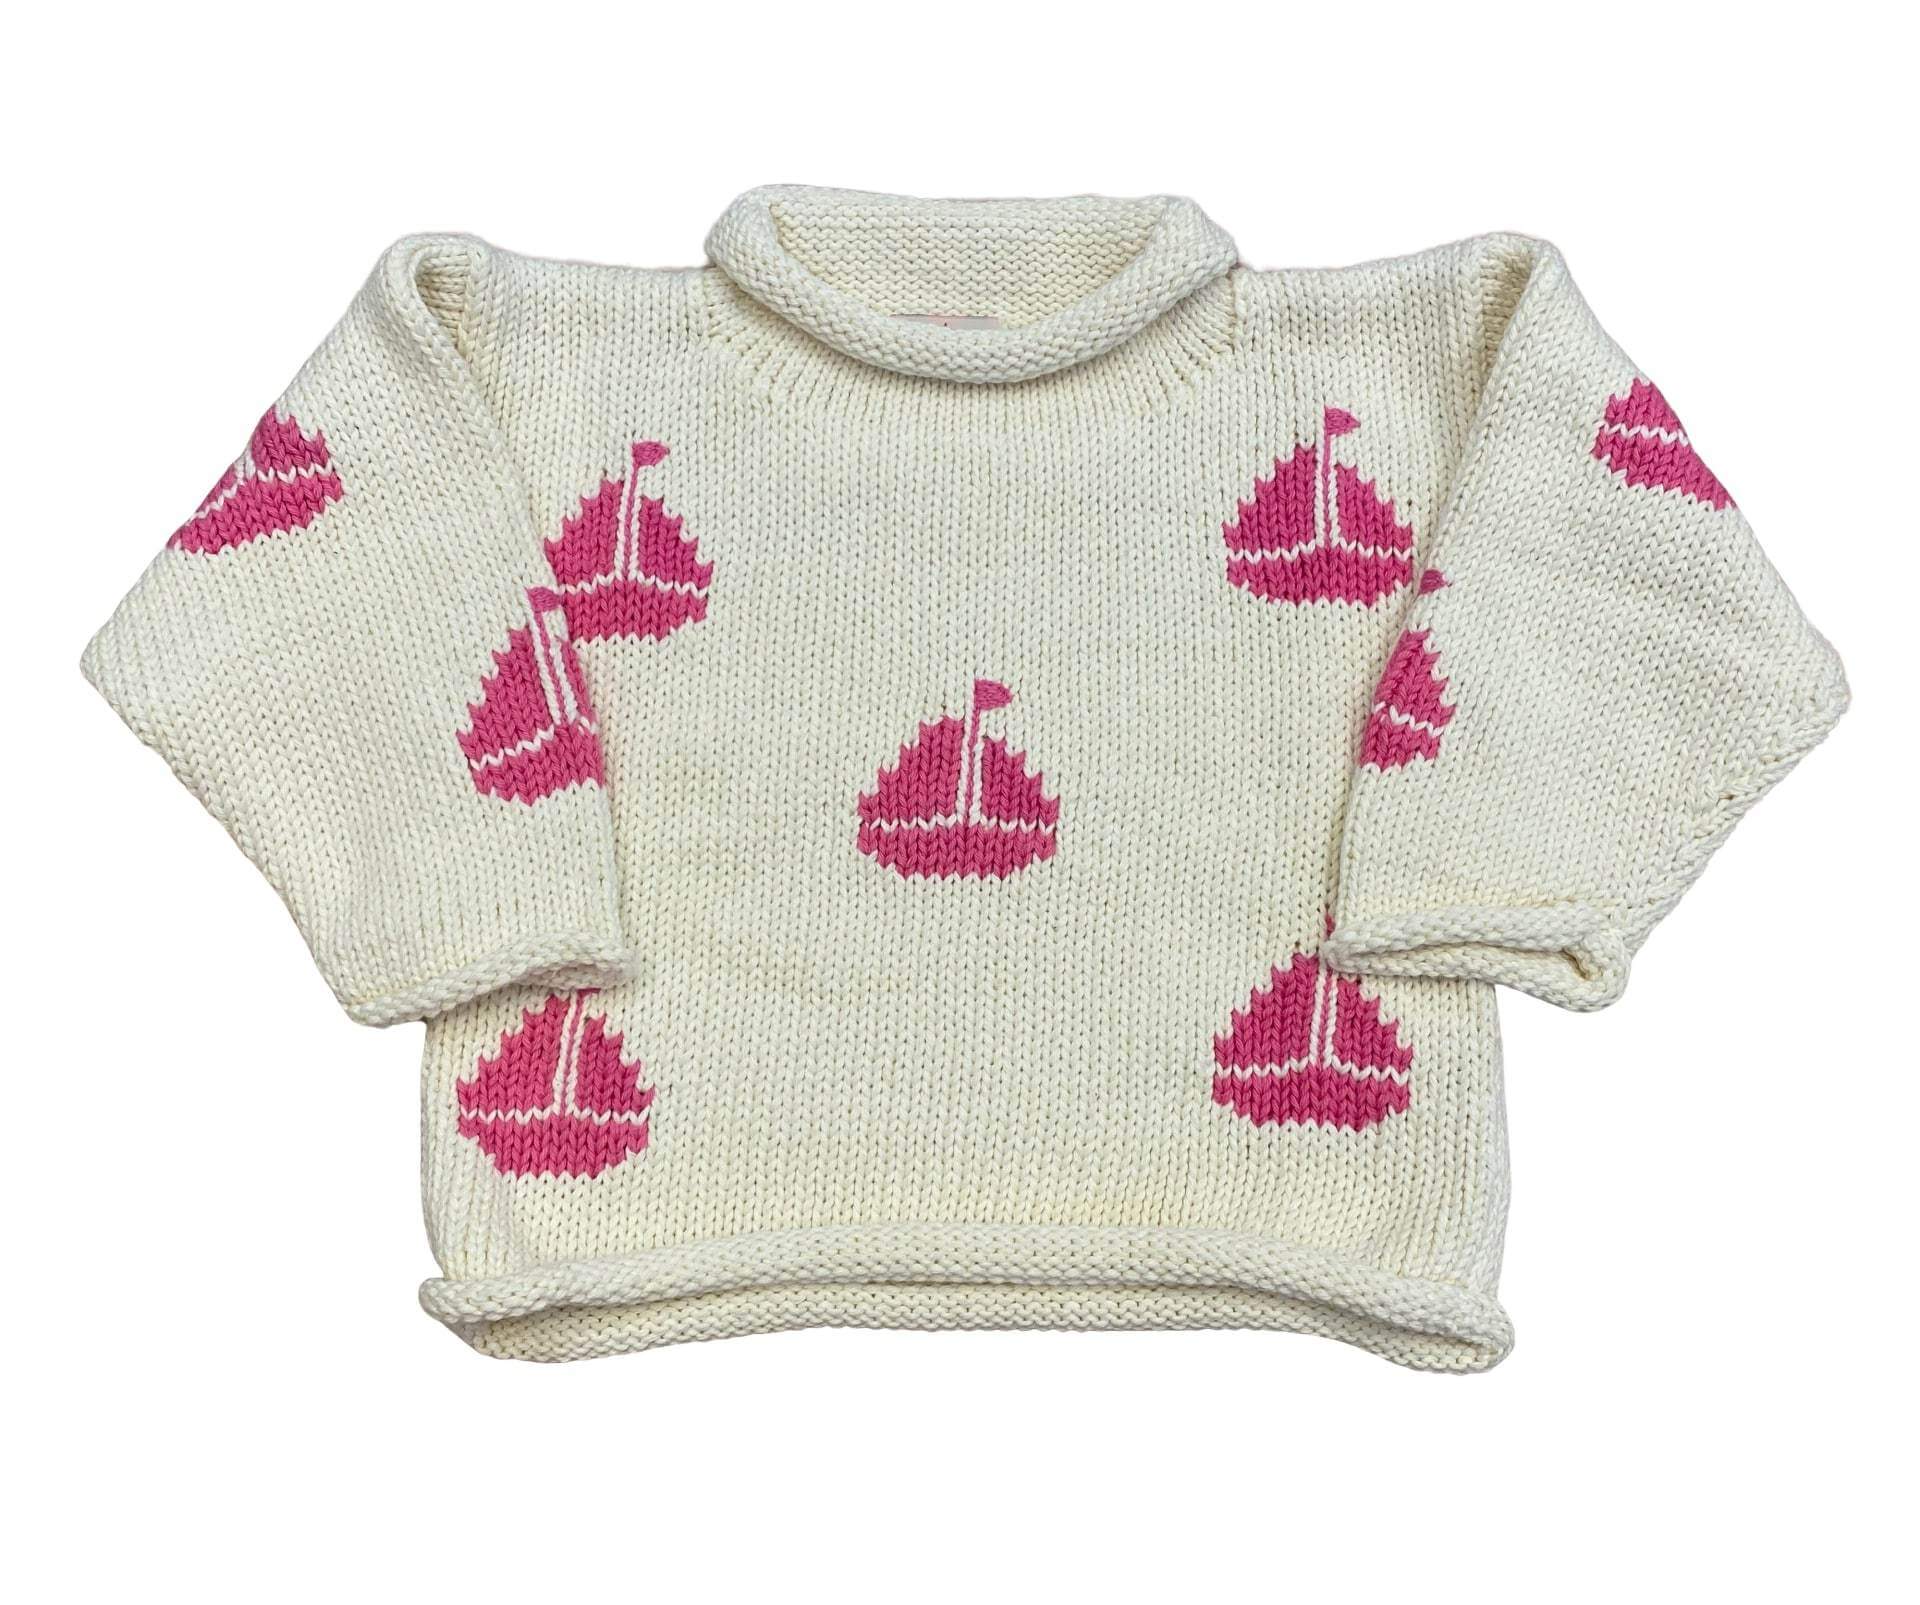 ivory roll neck sweater with pink sailboats knitted all over